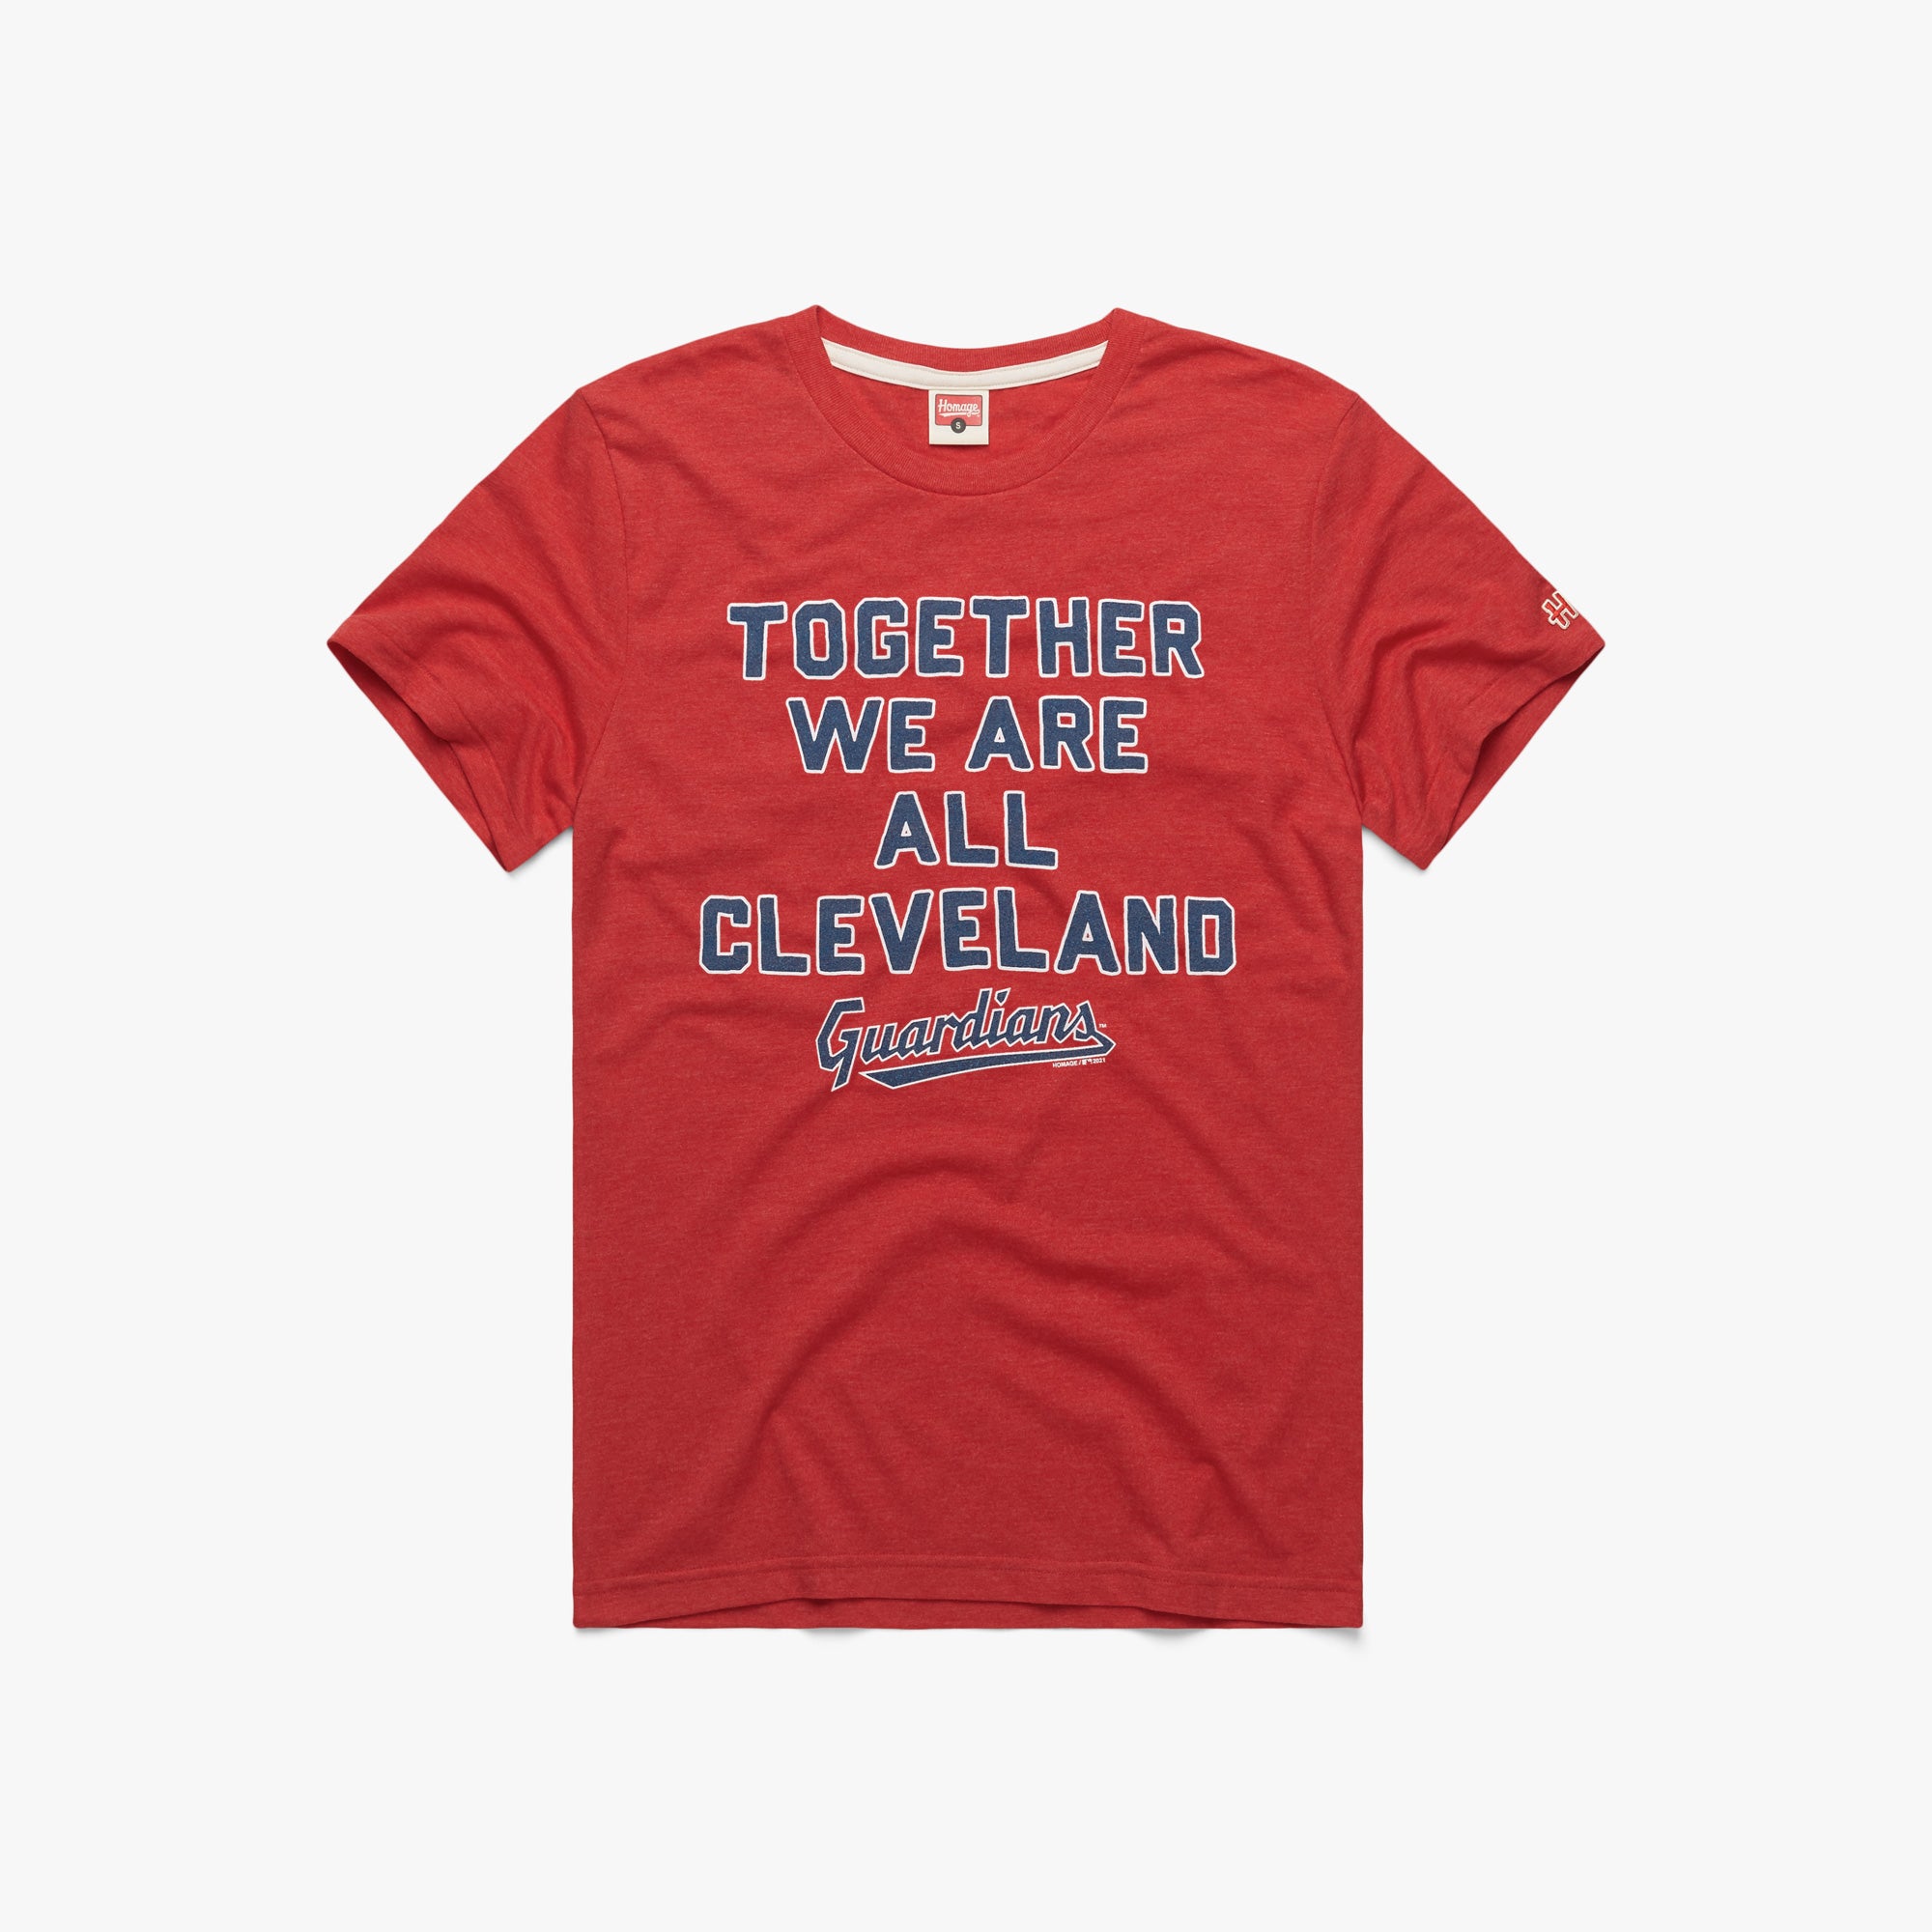 Together We Are All Cleveland Guardians